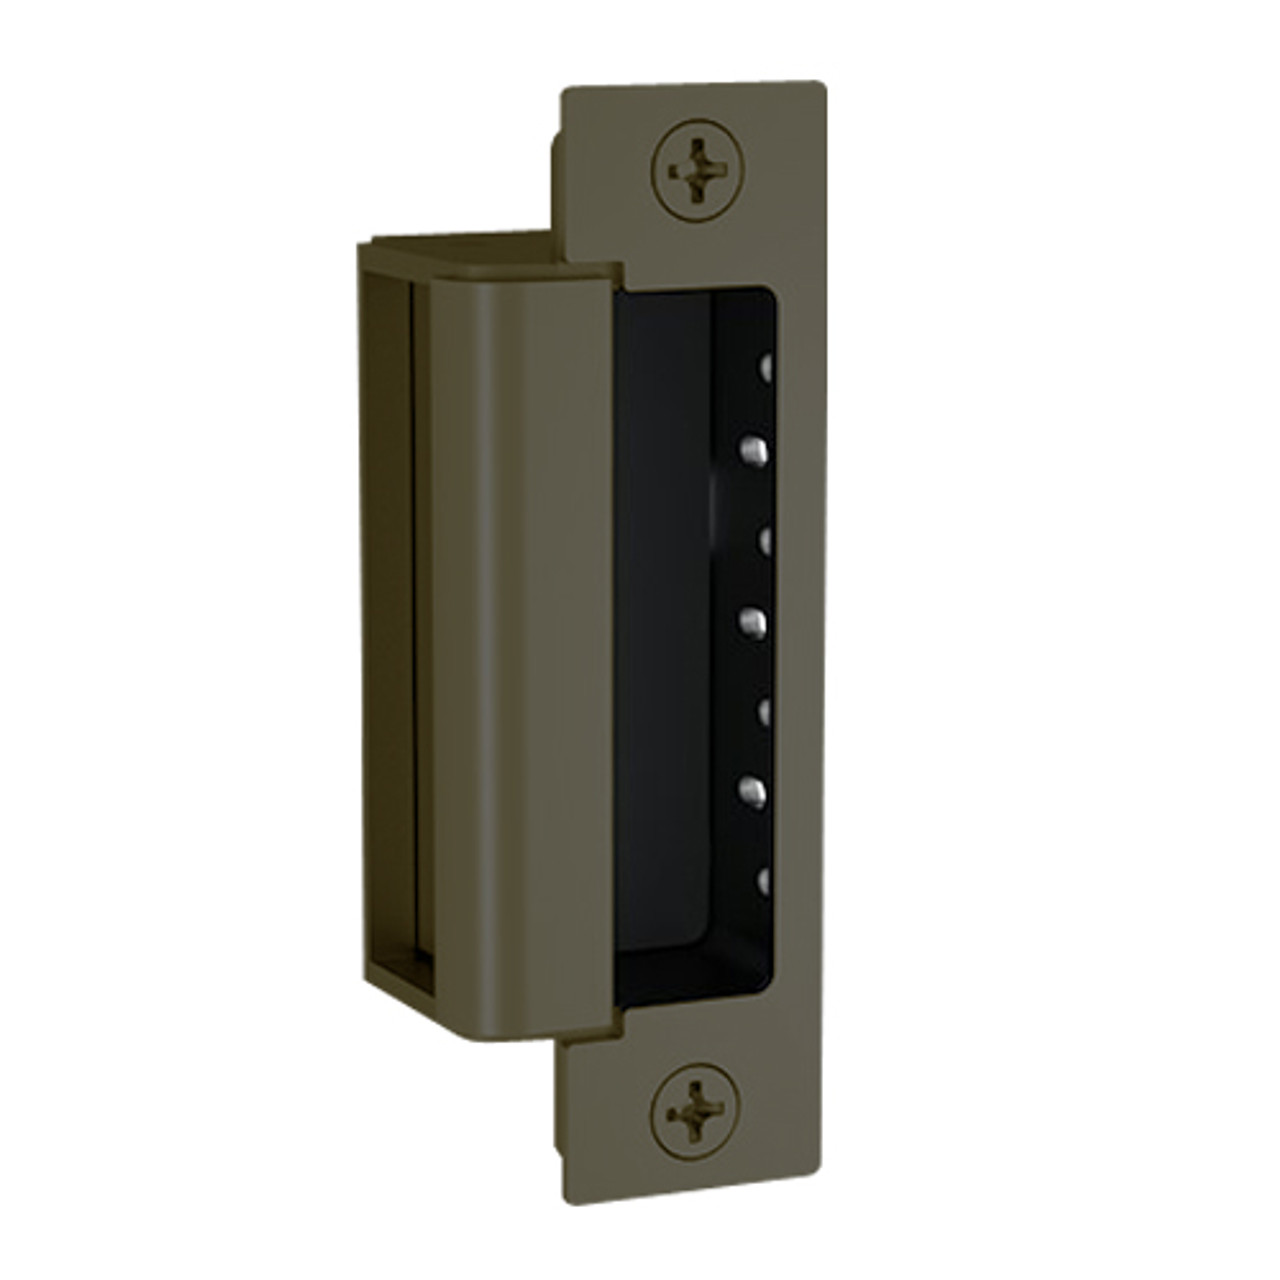 1600-CLB-LM-613E Hes 1600 Series Dynamic Low Profile Electric Strike for Latchbolt Lock with Lock Monitor in Dark Oxidized Satin Bronze